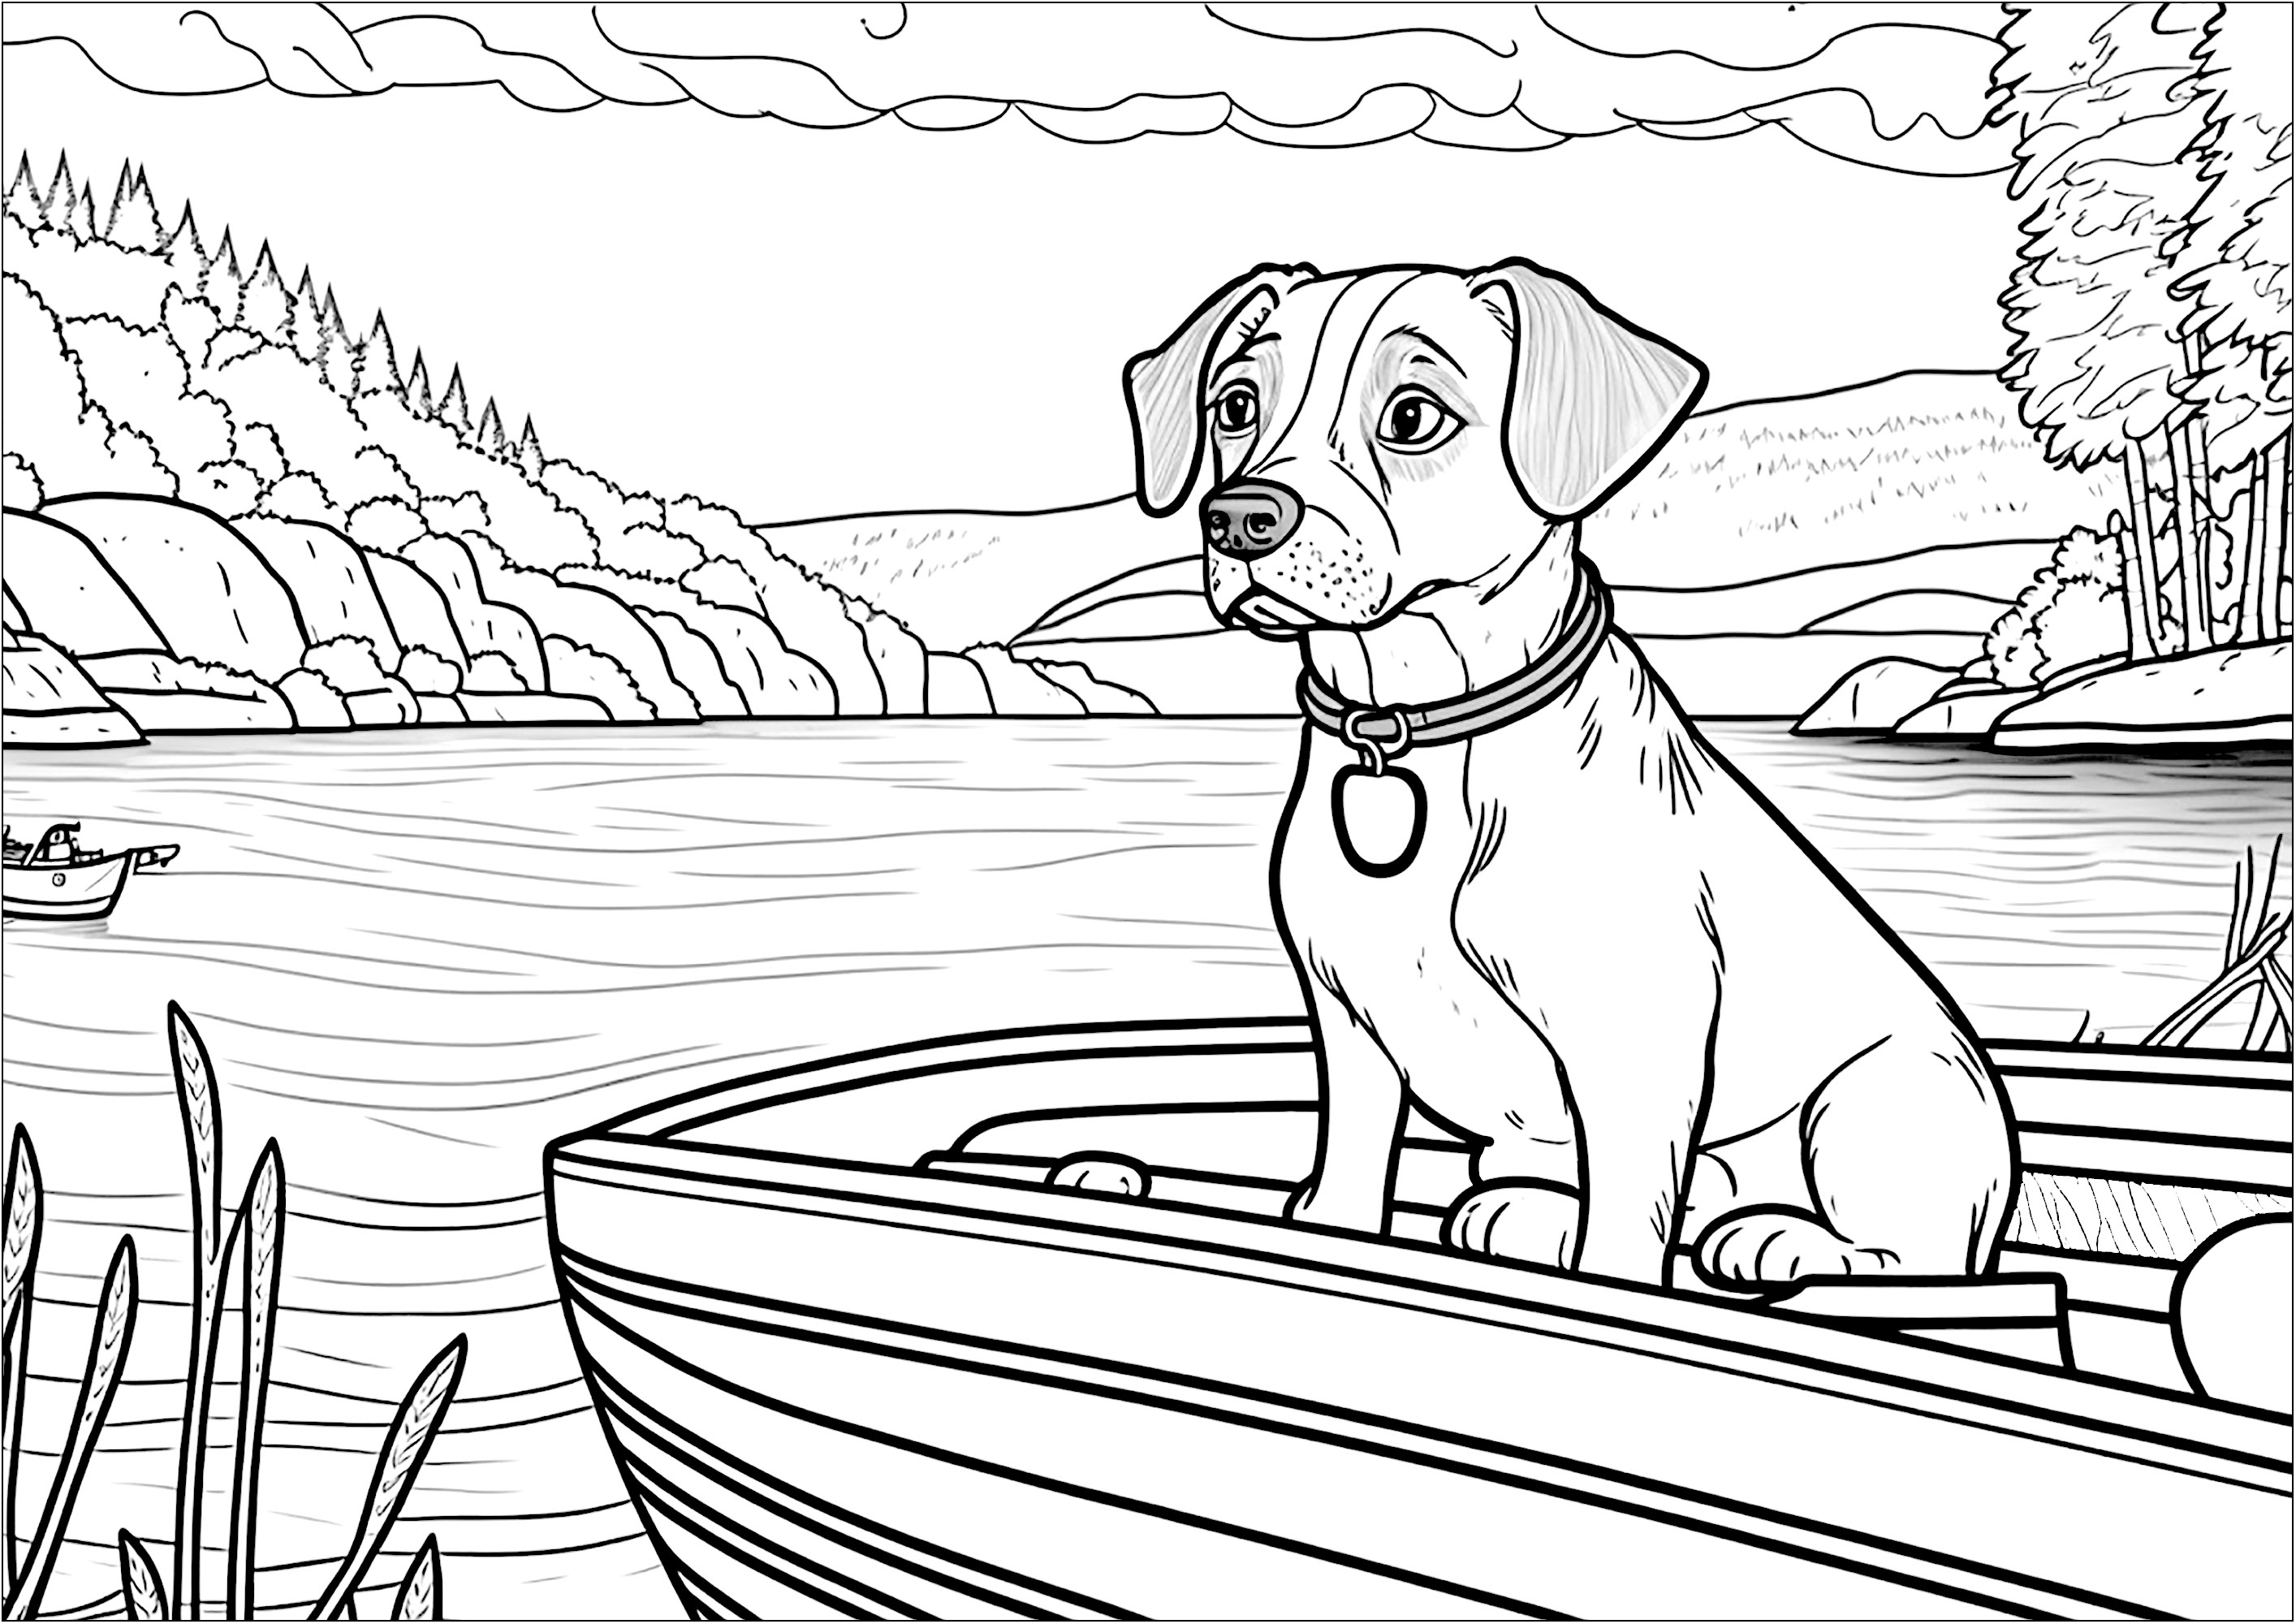 Dog on a boat. This coloring page shows a dog on a boat, sailing on a lake.The background landscape is beautiful: mountains, forests ...